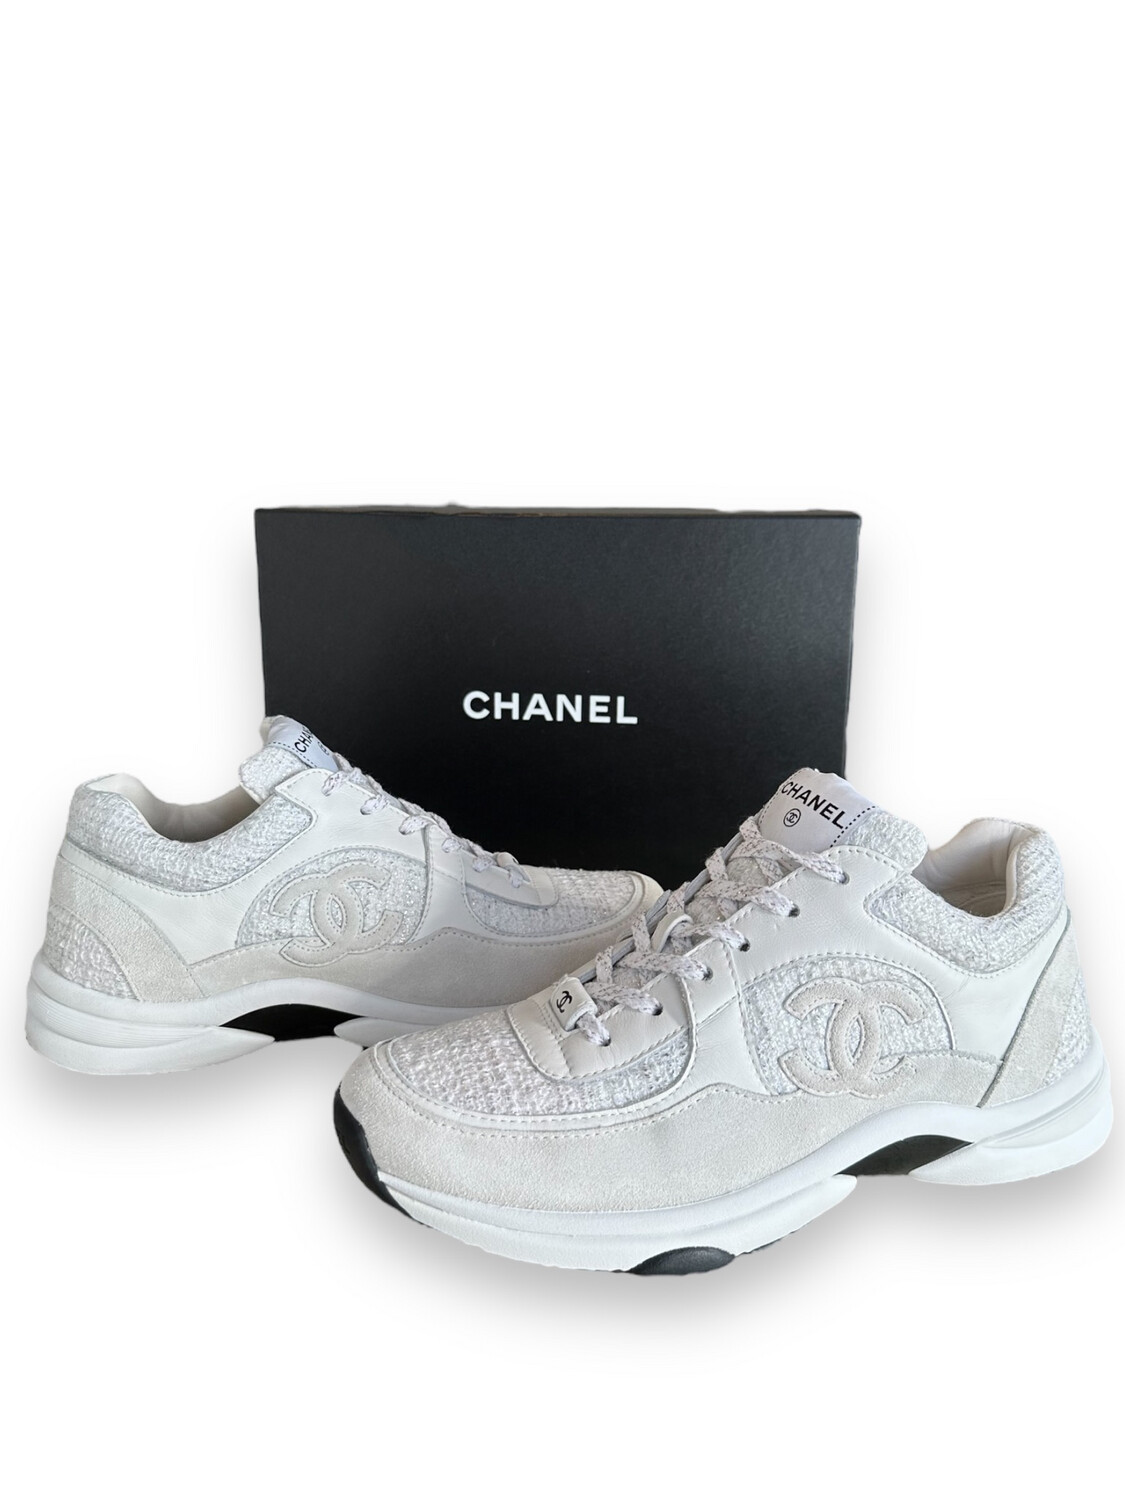 Chanel Shoes Sneakers - 82 For Sale on 1stDibs